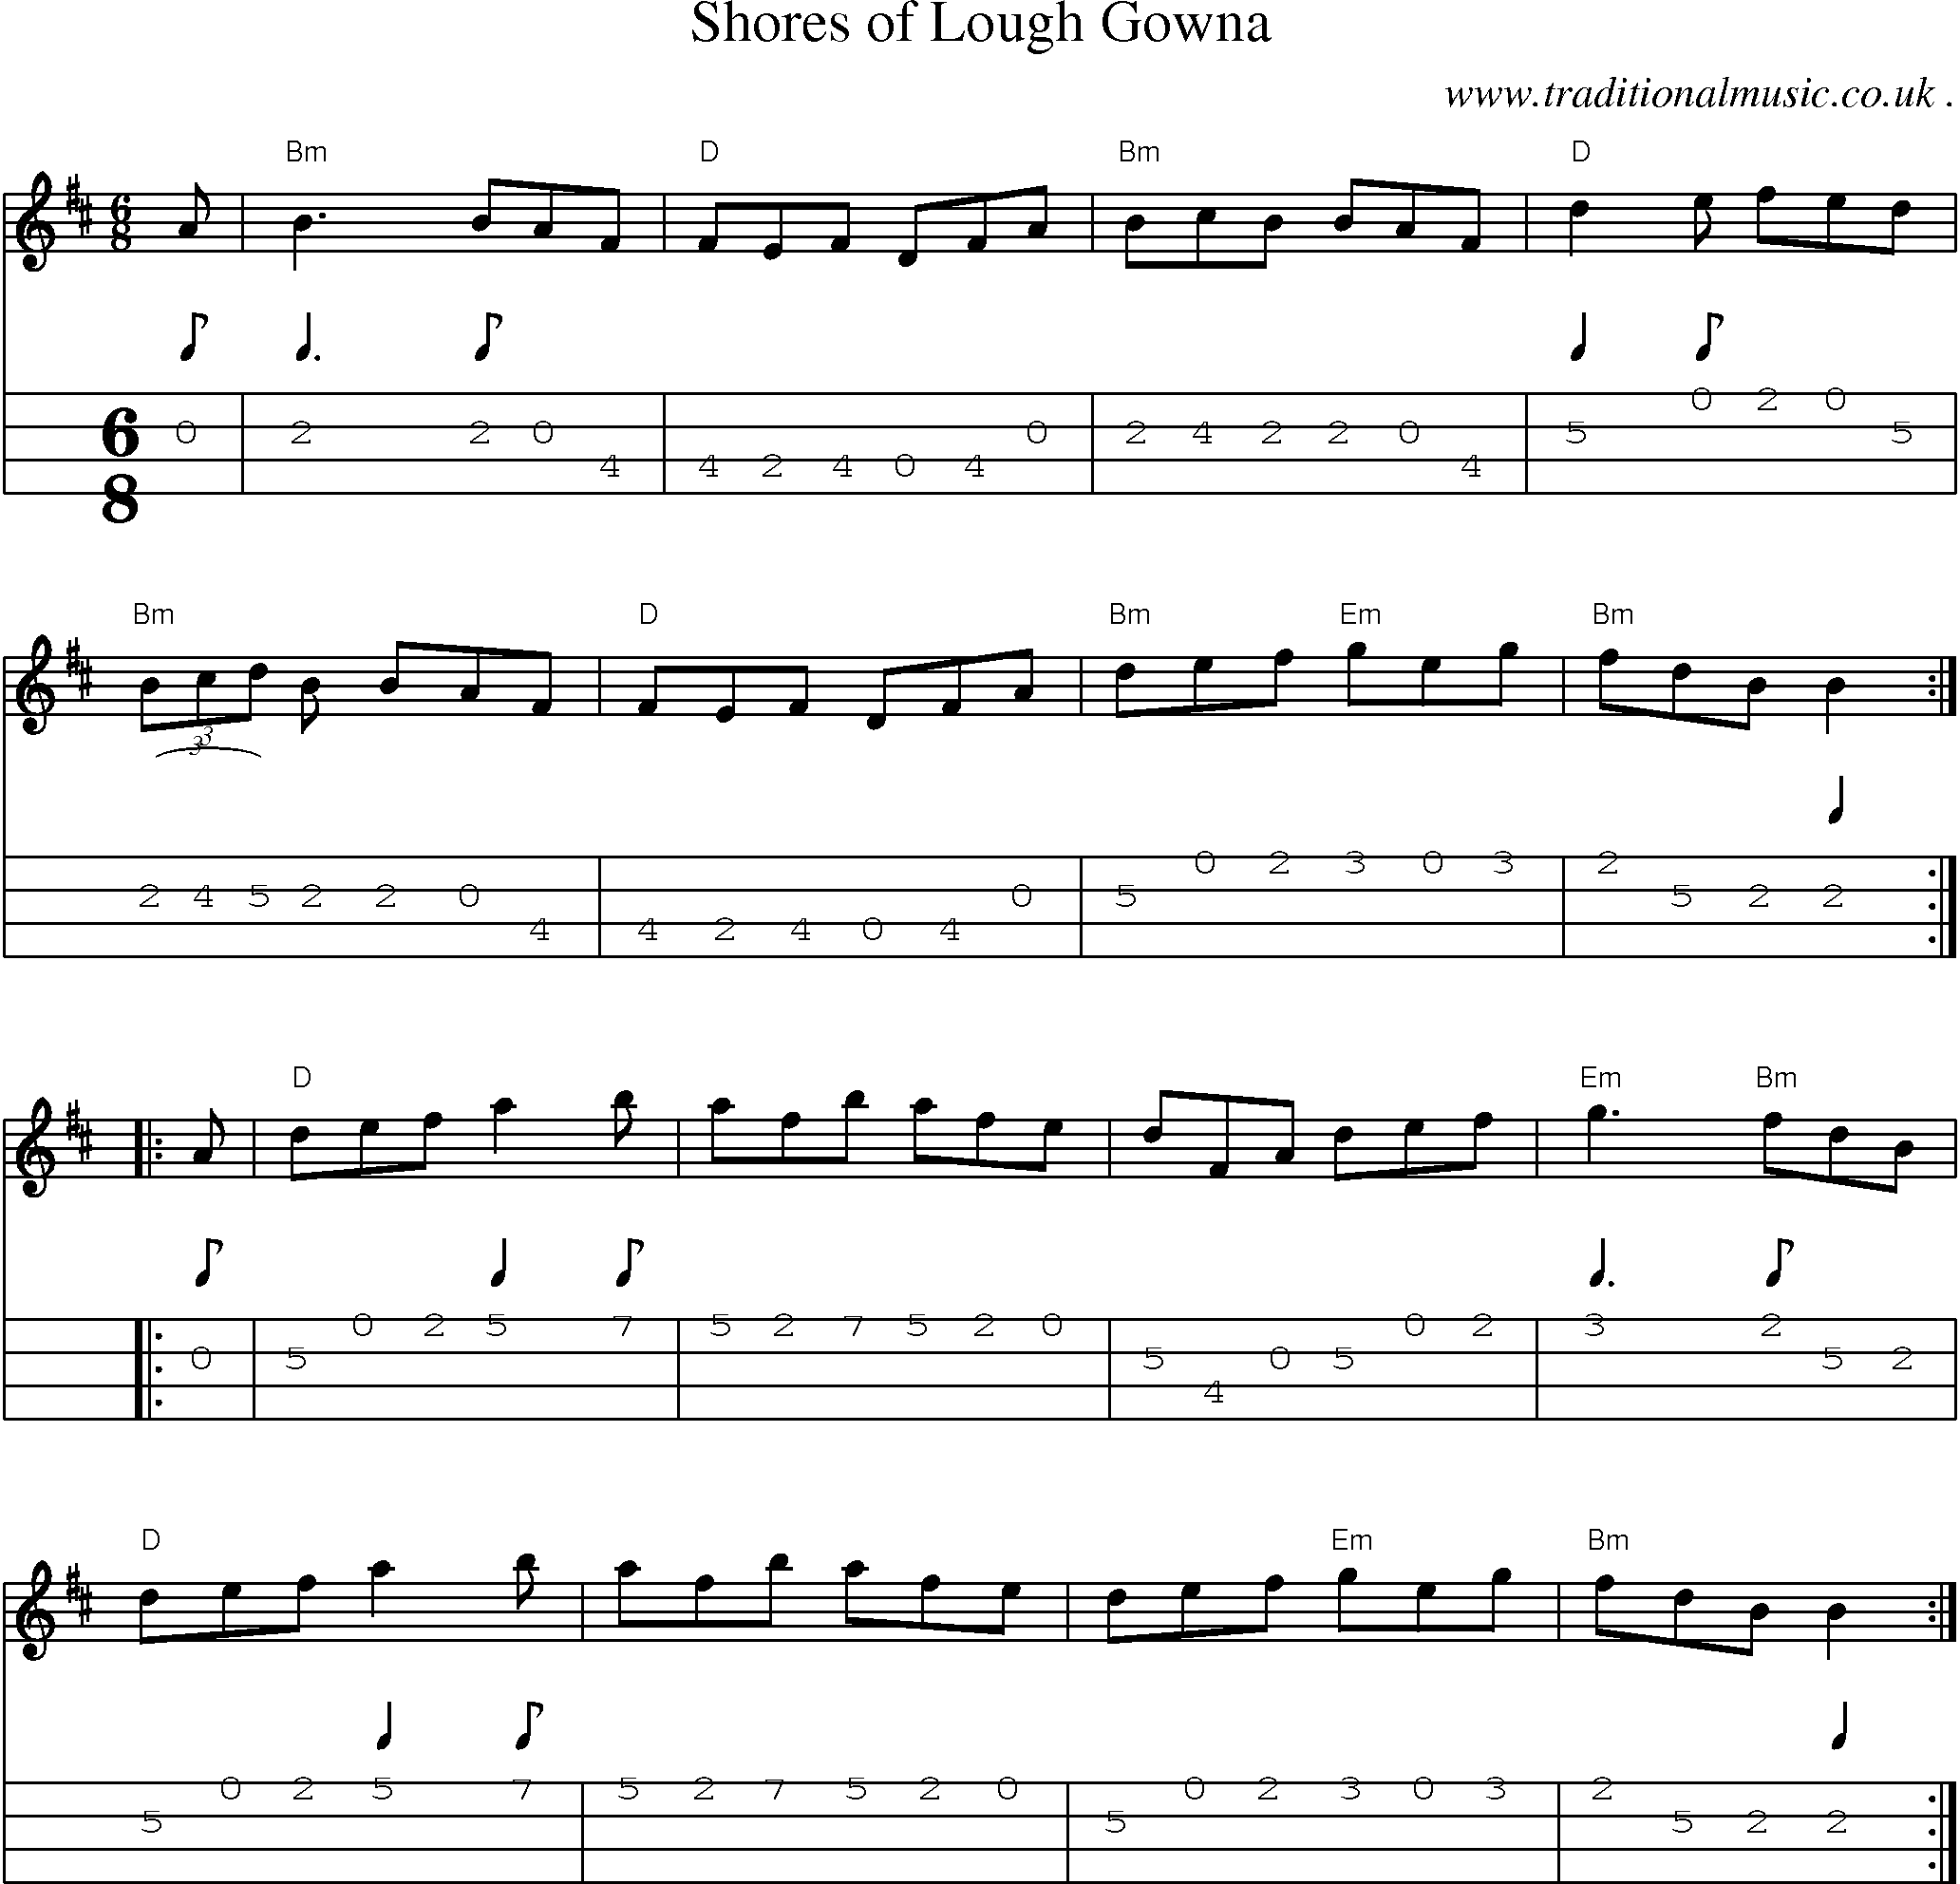 Music Score and Guitar Tabs for Shores Of Lough Gowna